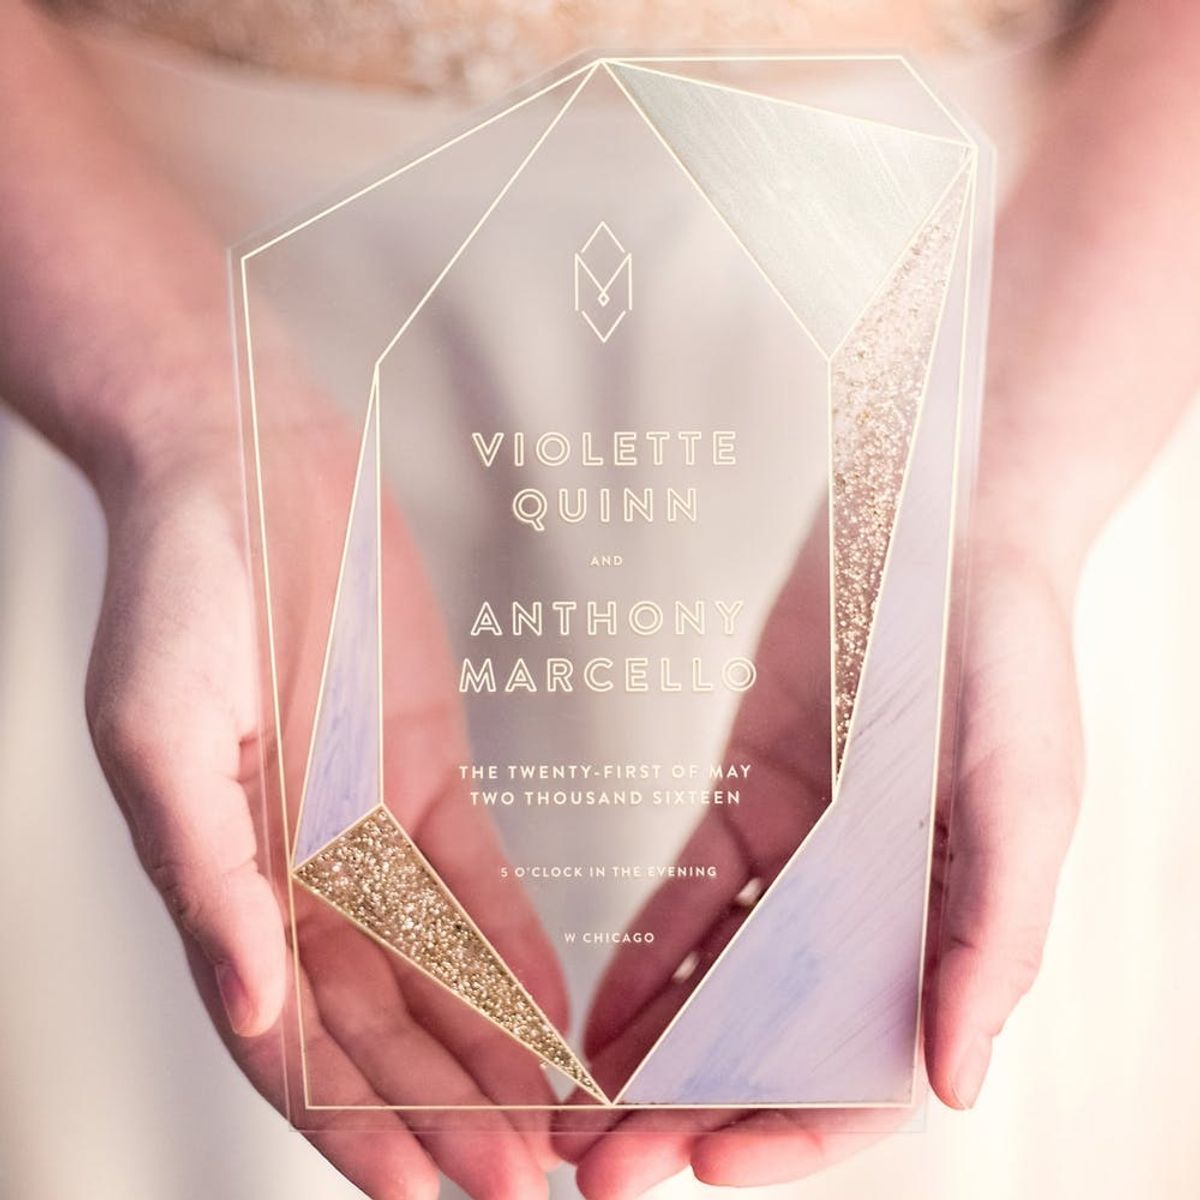 Acrylic Invites Are the Latest Wedding Trend Filling Up *All* Your Feeds